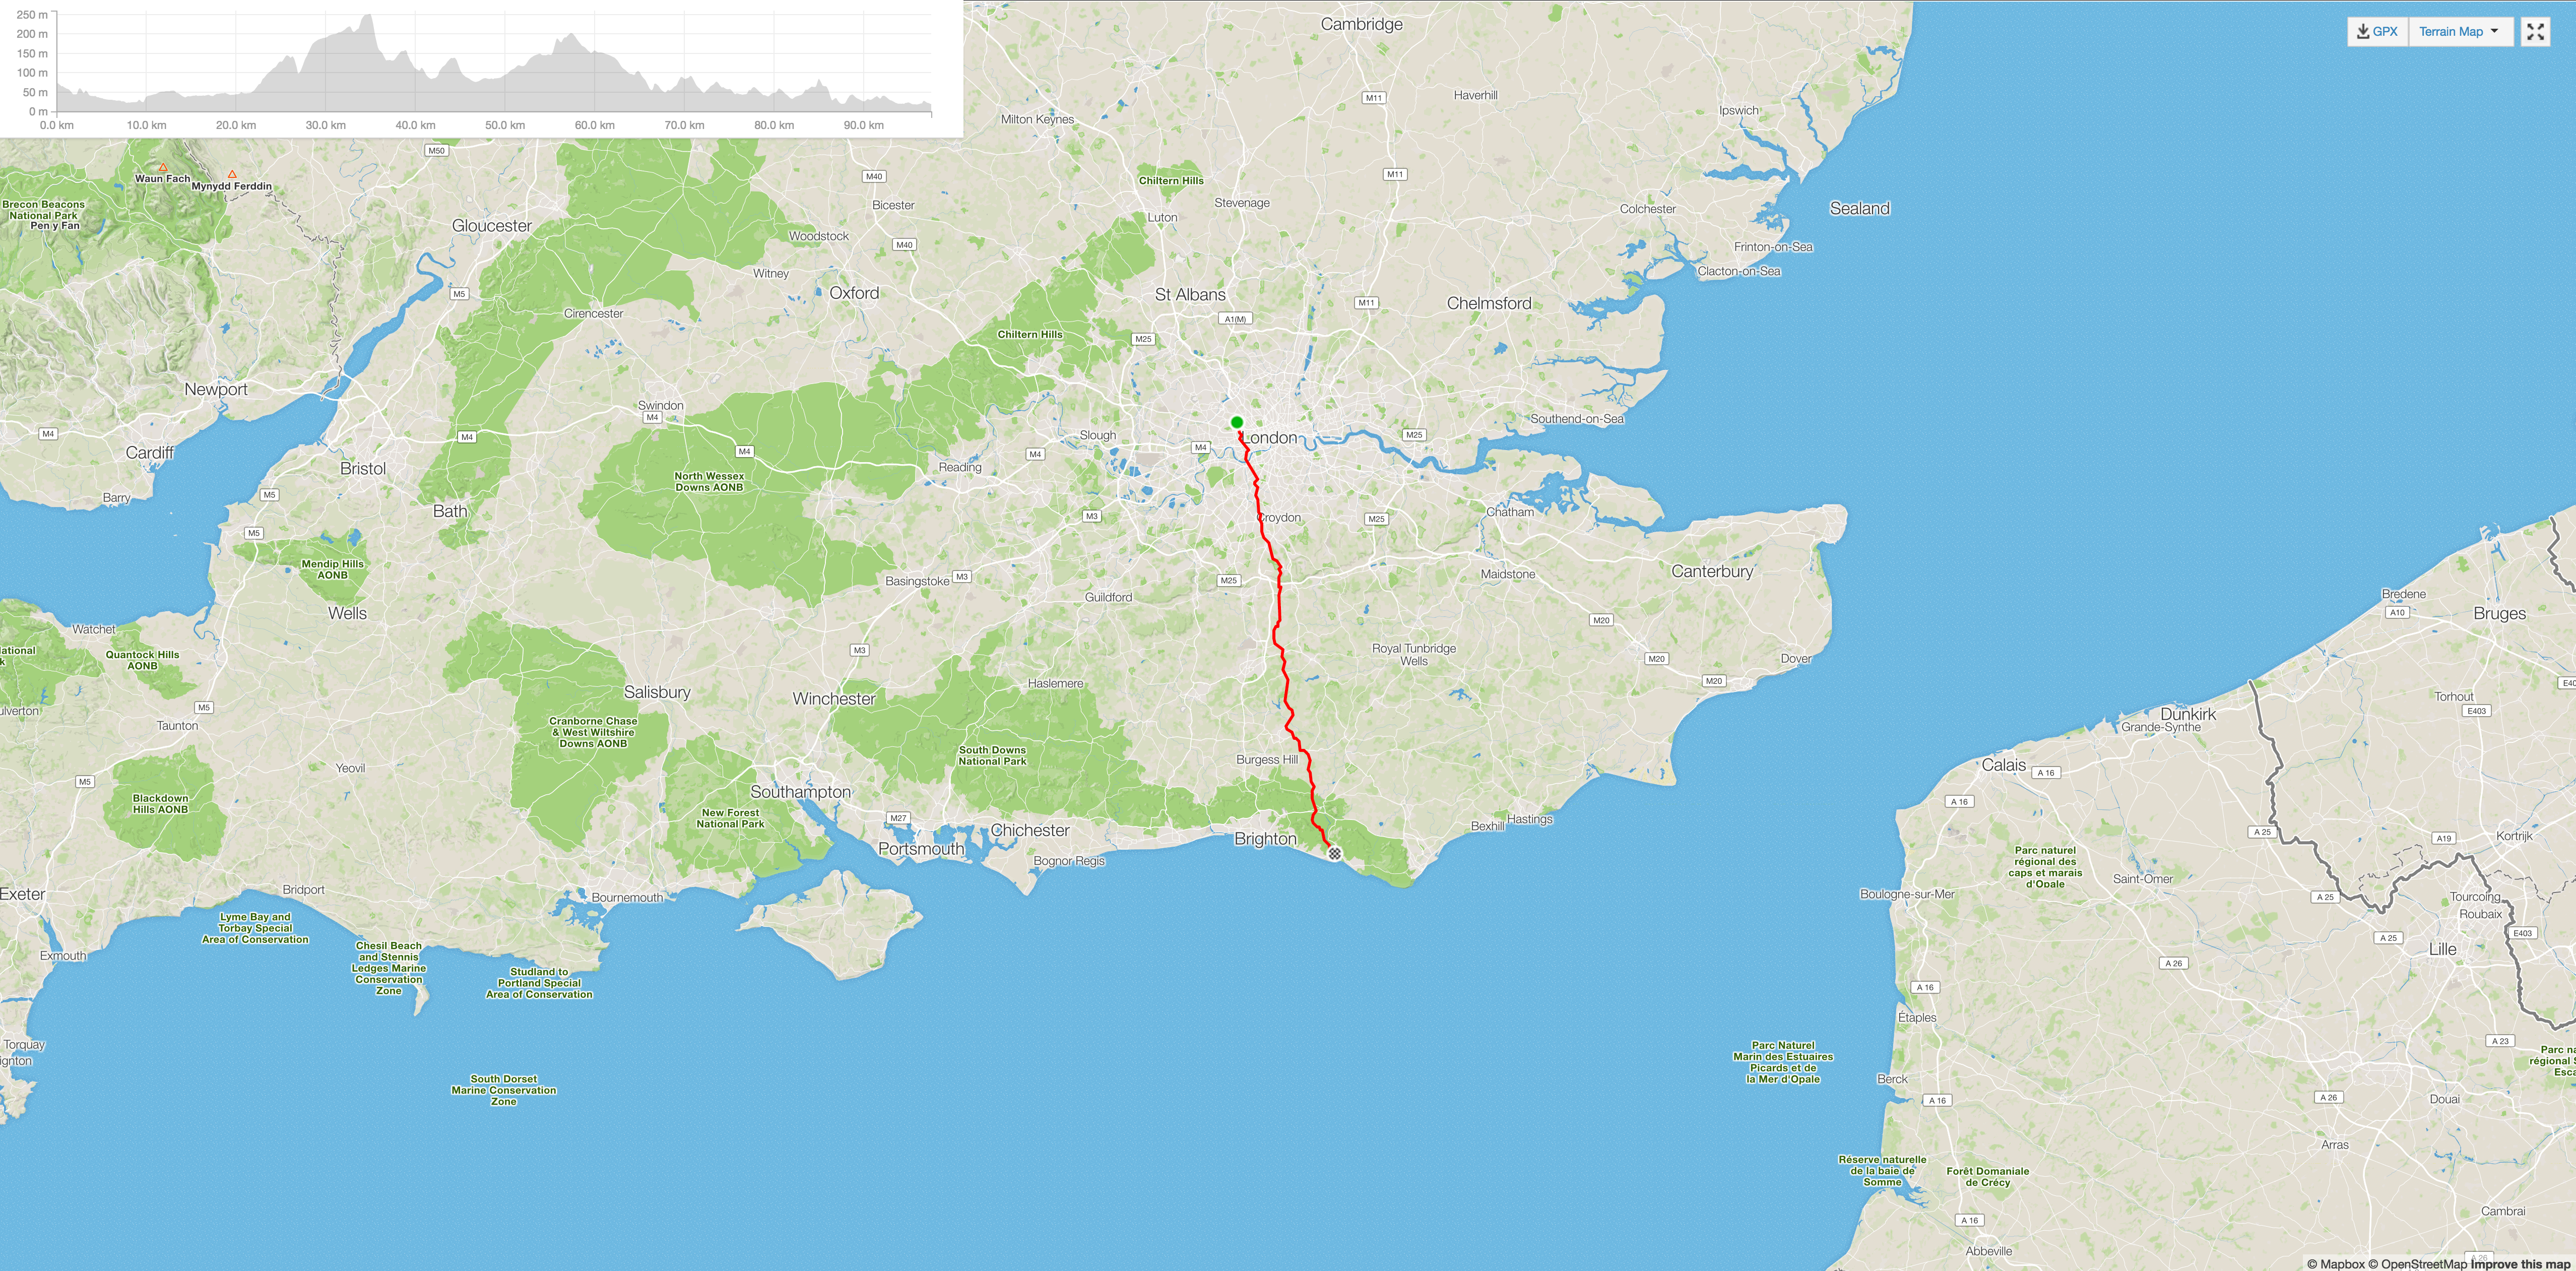 Chris' strava file shows the first leg of his London to Paris journey